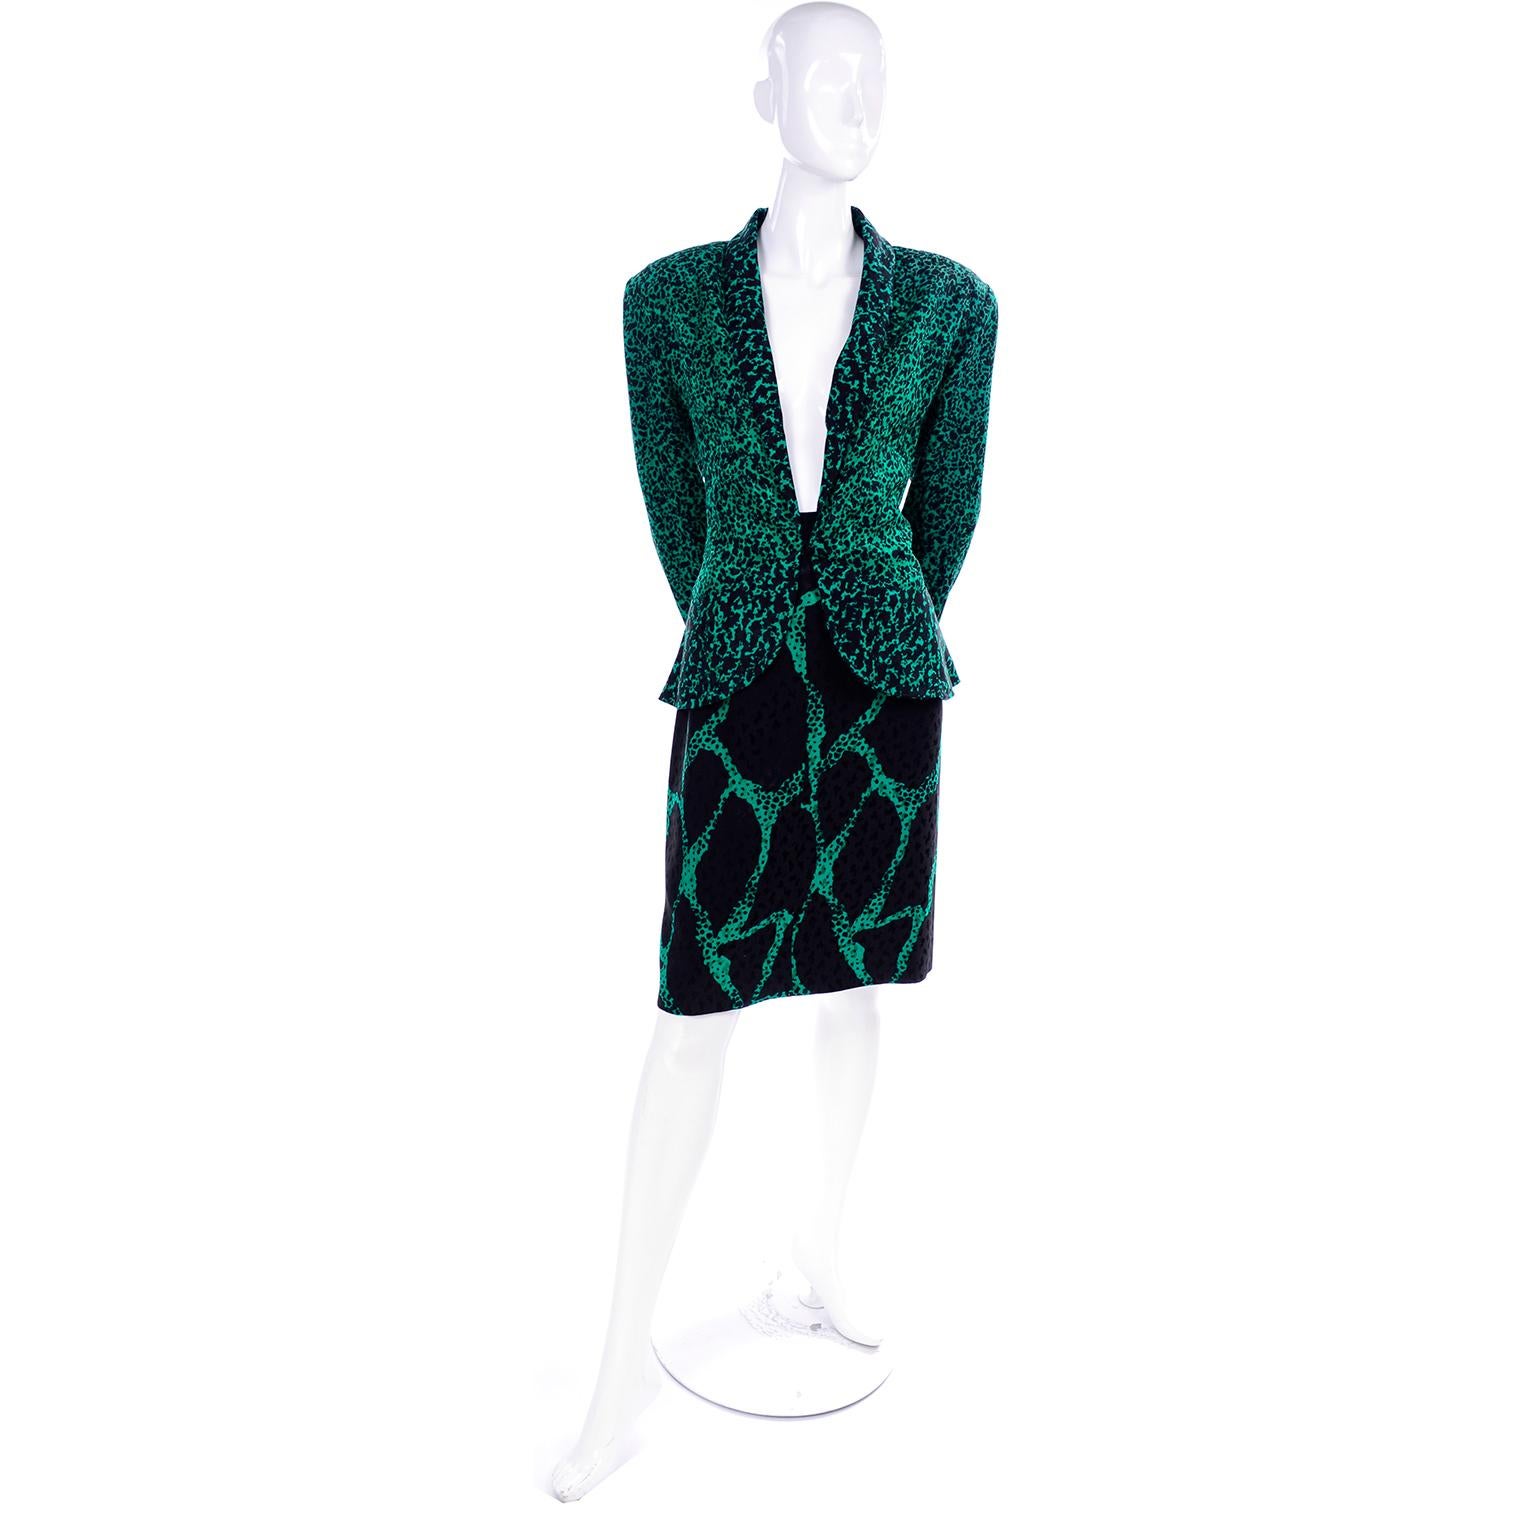 This outfit is an example of pattern mixing at its finest! This is a Vicky Tiel electric green and black skirt suit with an abstract animal print pattern. This beautiful suit was purchased at Neiman Marcus in the 1980's.  It includes a peplum jacket